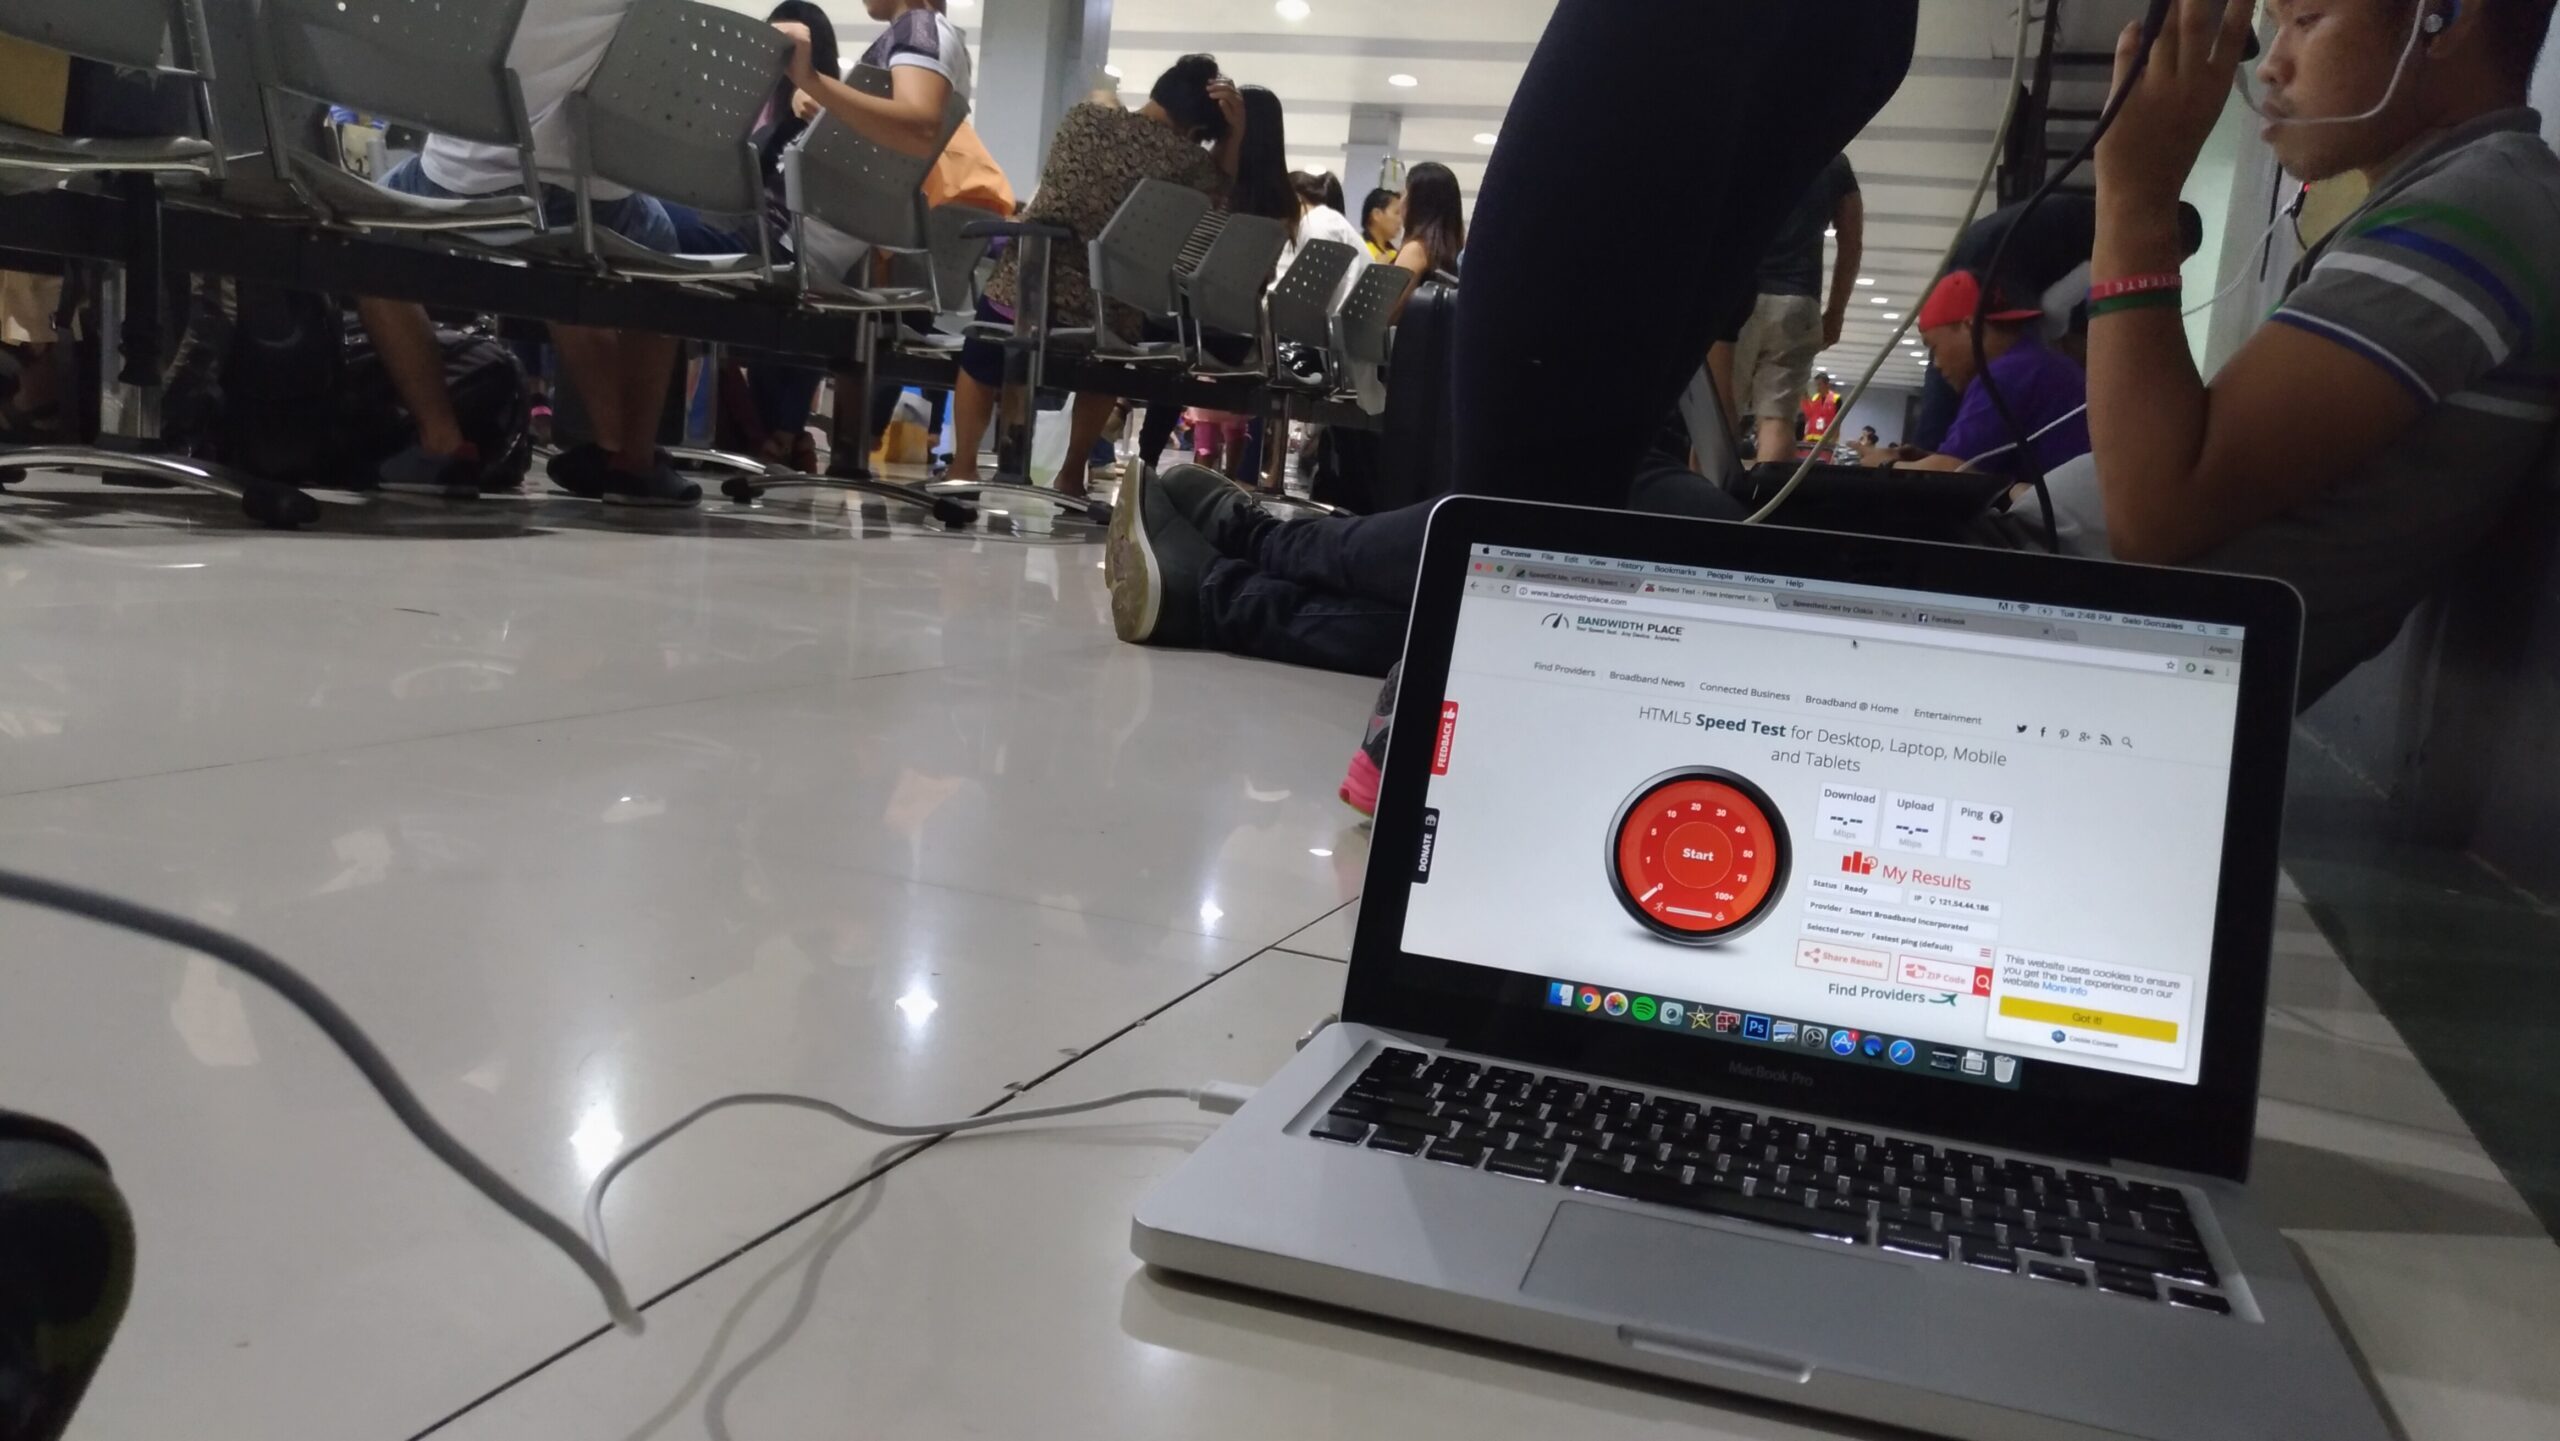 I worked at NAIA Terminal 4 for a day to test Smart’s 1 Gbps WiFi